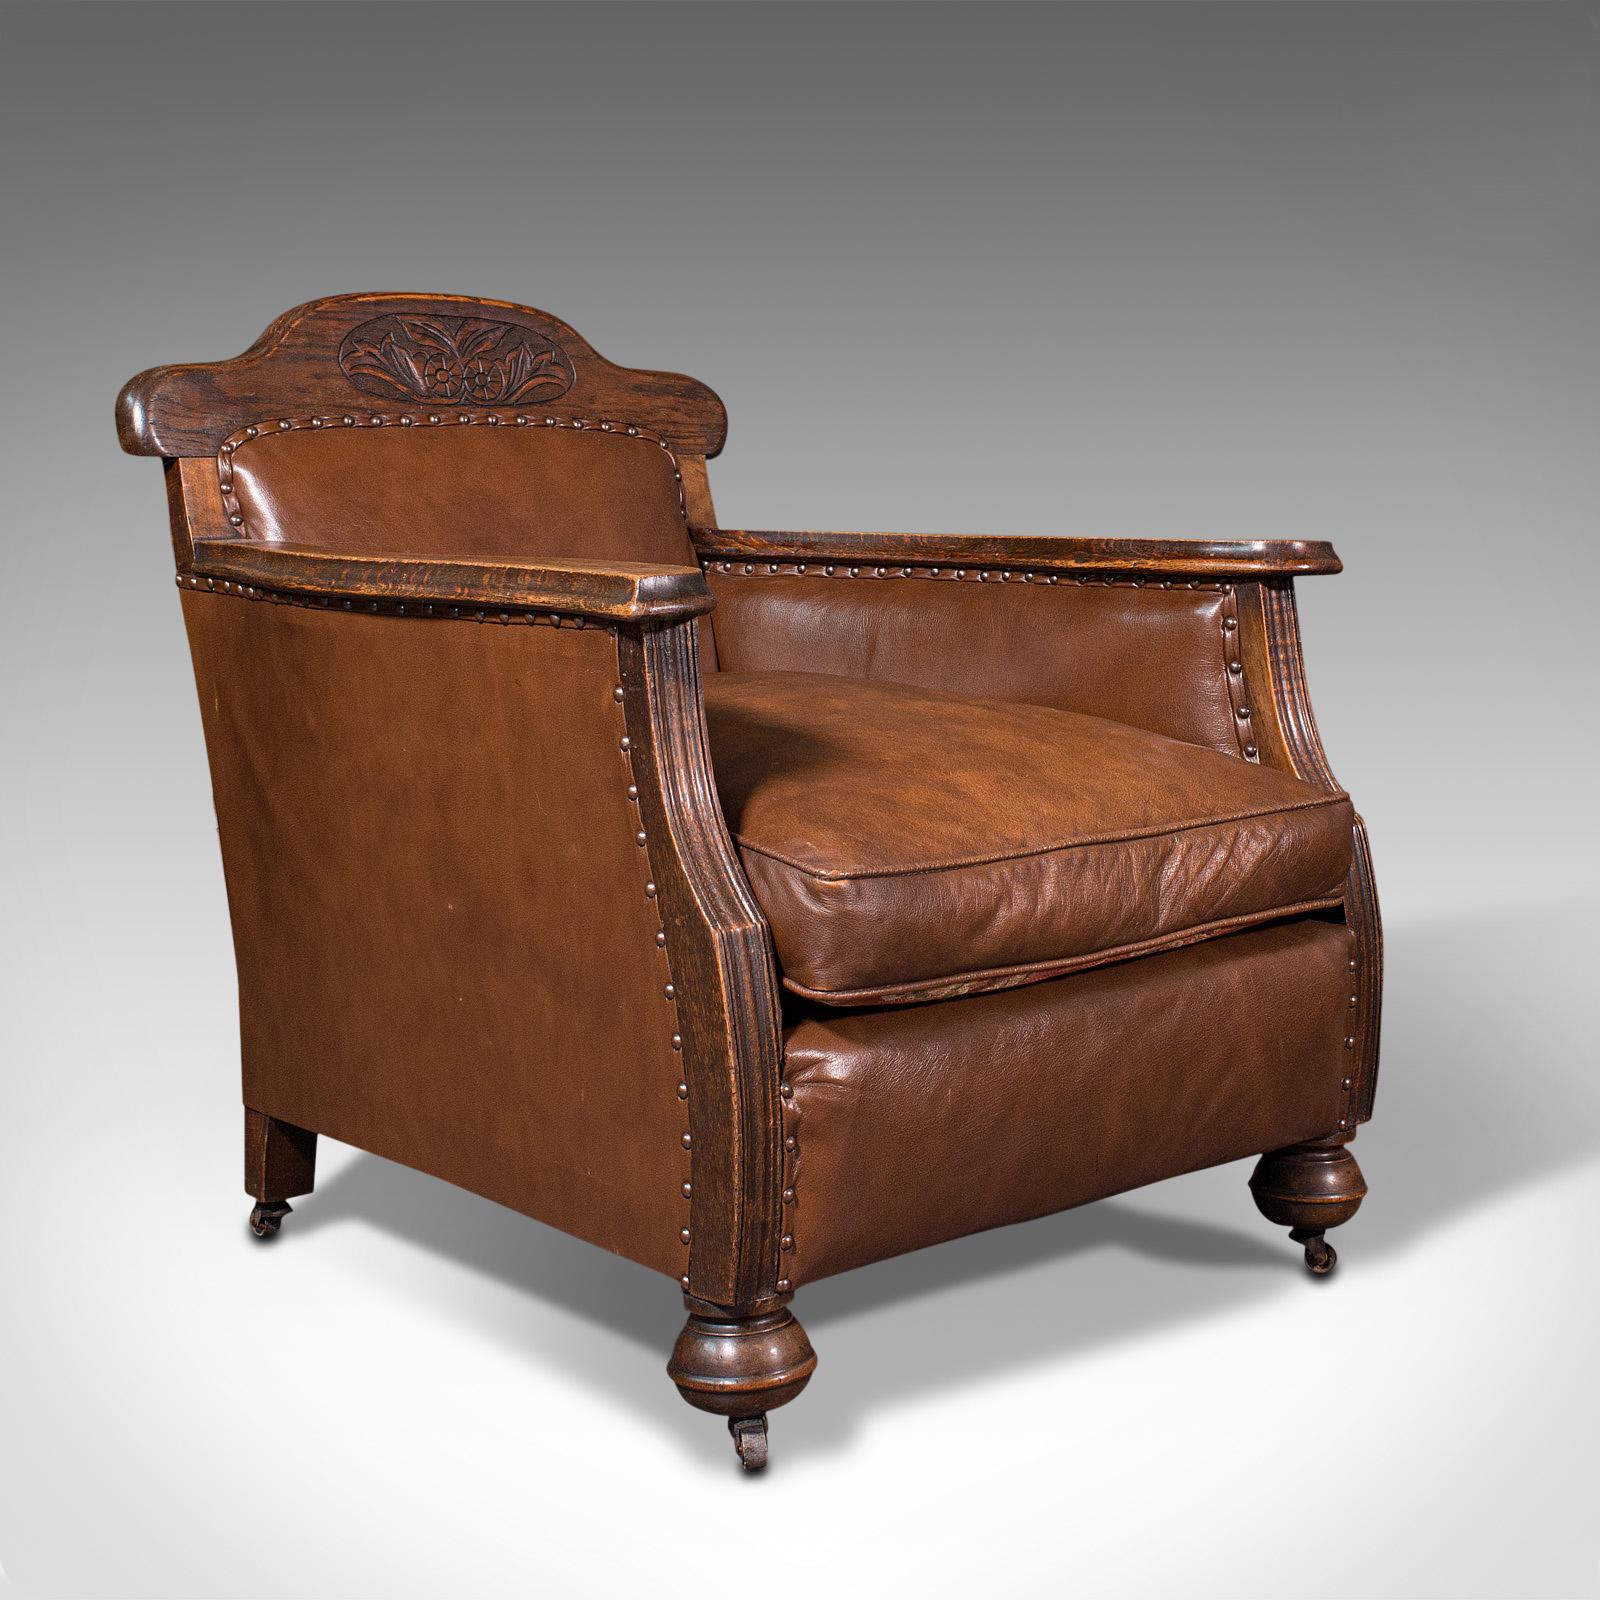 This is a pair of antique gentleman's club armchairs. An English, oak and leather fireside seat, dating to the Edwardian period, circa 1910.

Wonderfully long of thigh for relaxed use
Displays a desirable aged patina throughout
Later,